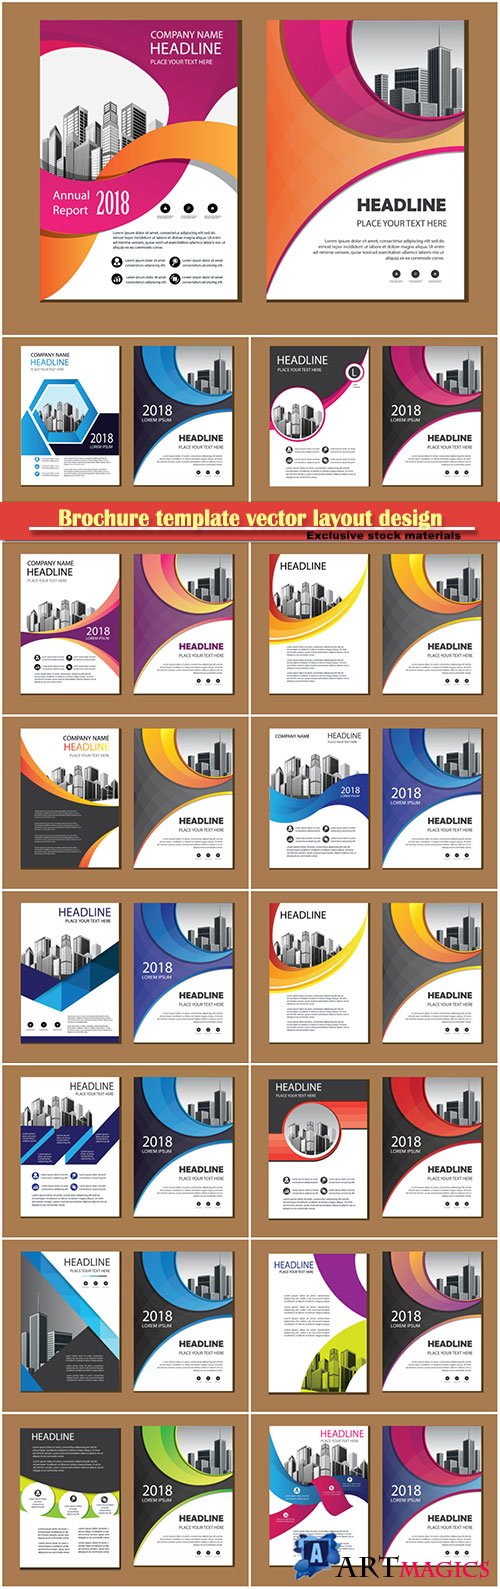 Brochure template vector layout design, corporate business annual report, magazine, flyer mockup # 149